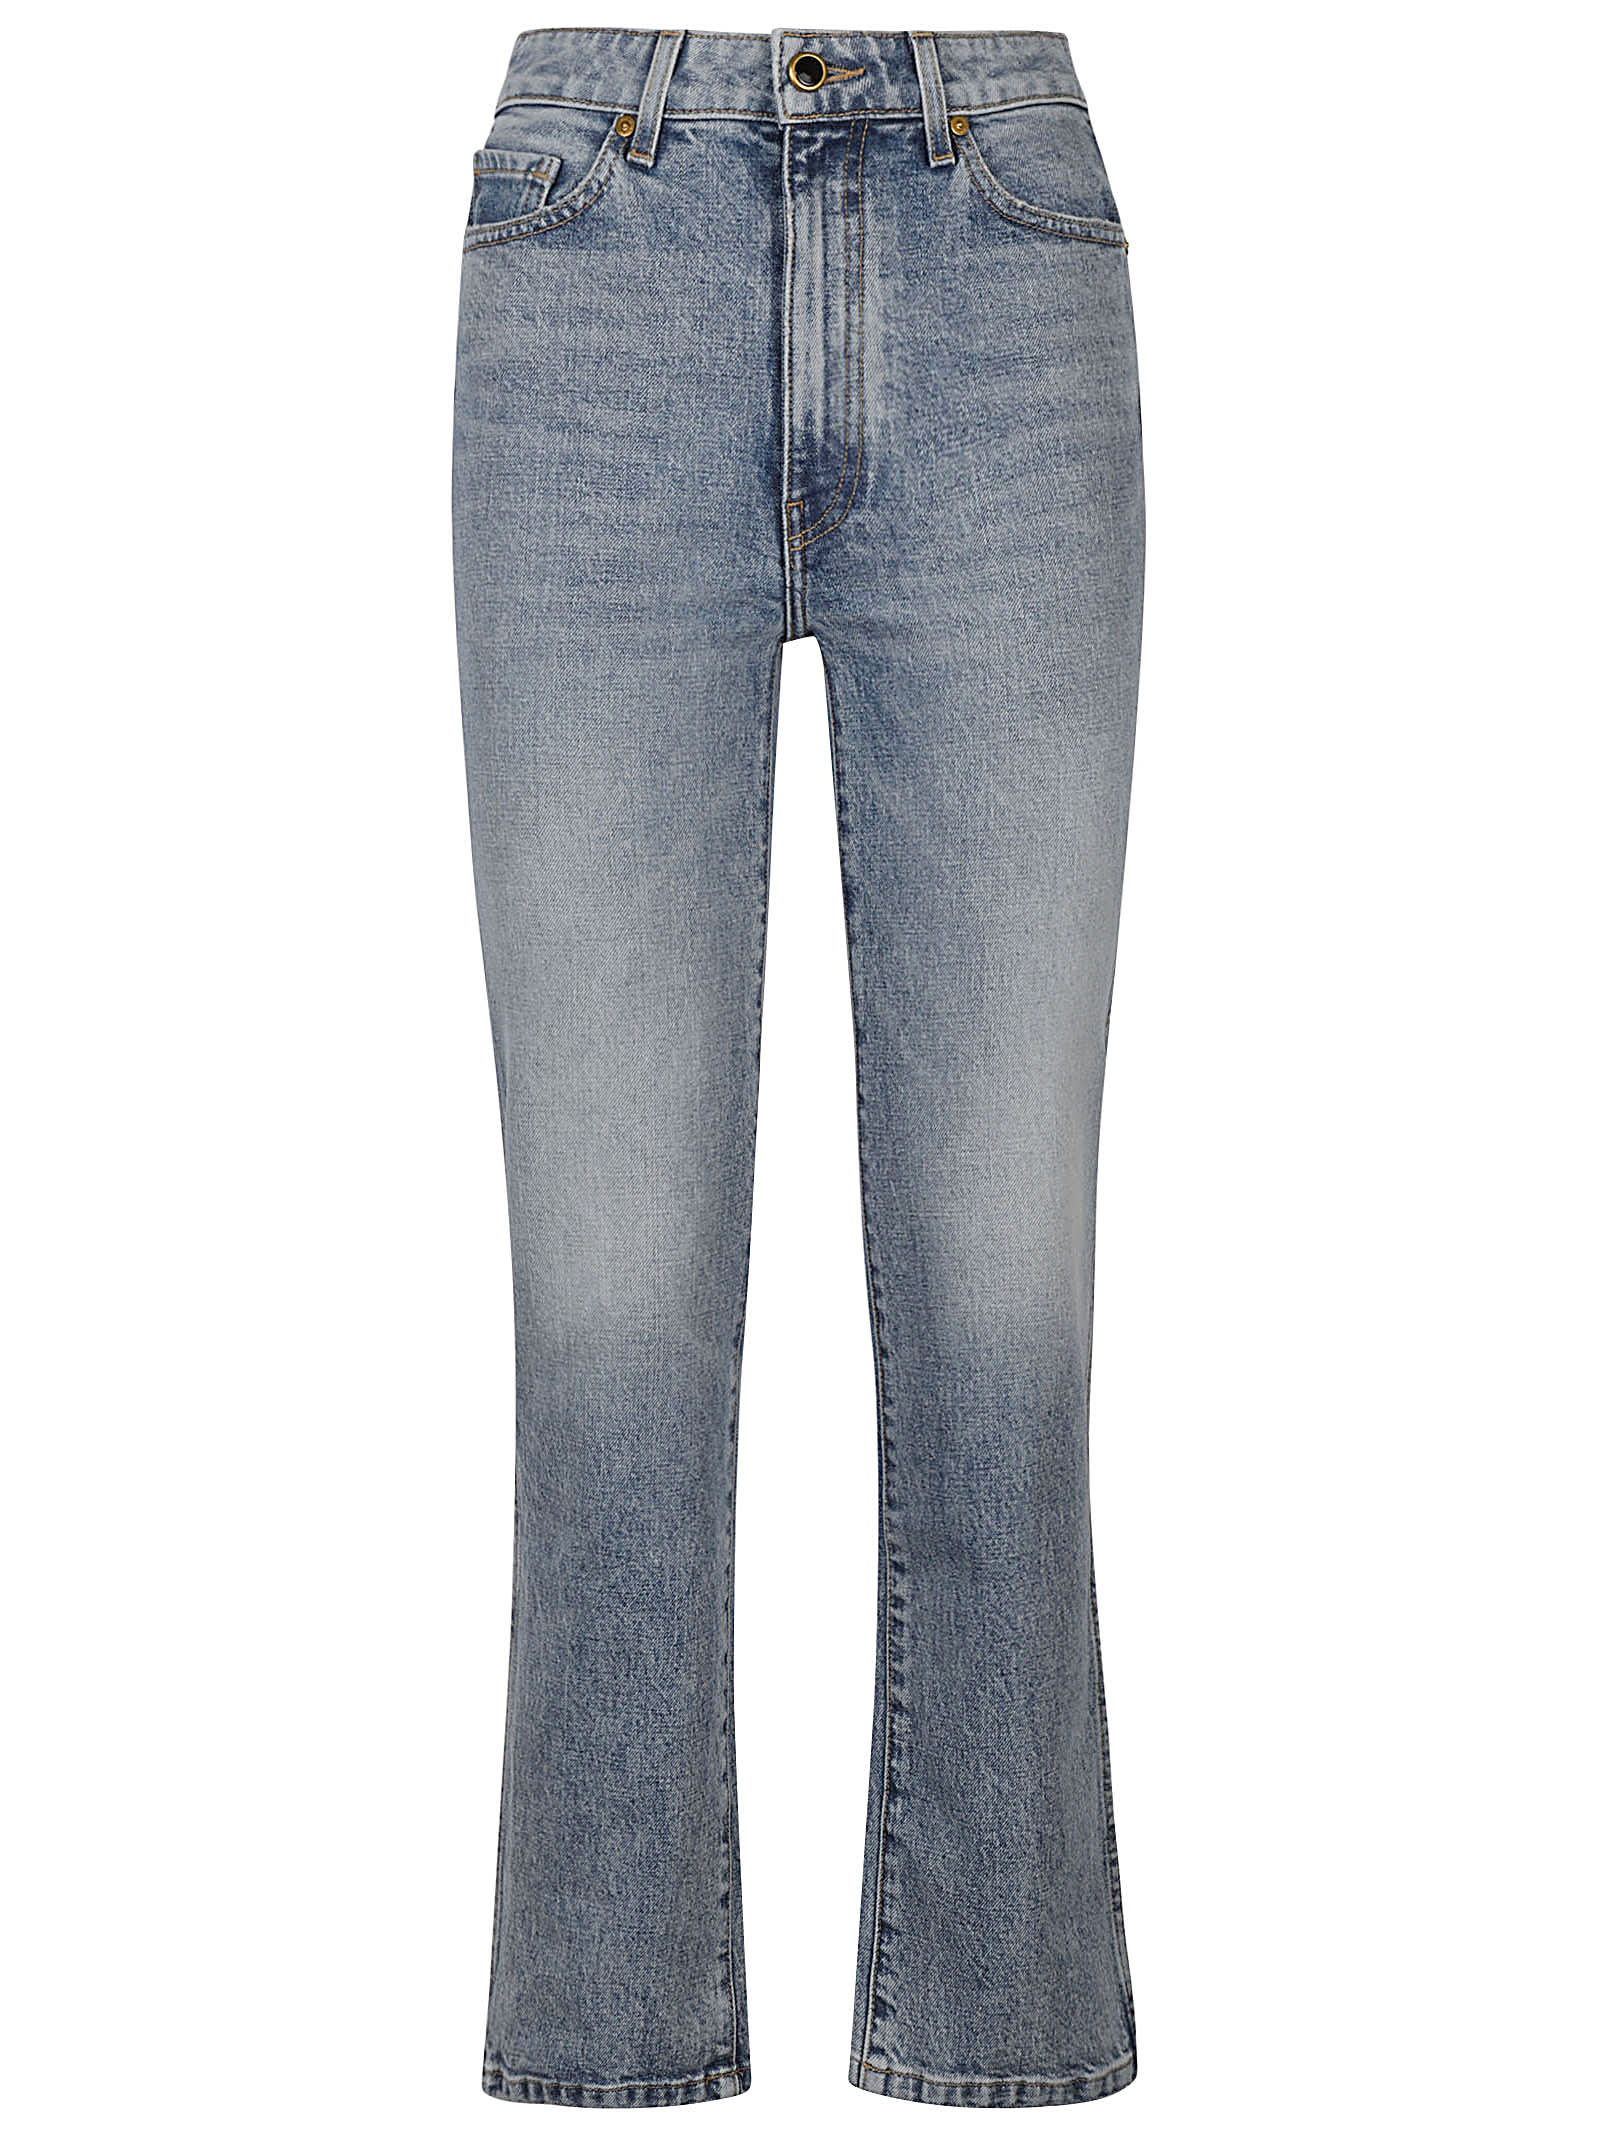 KHAITE CLASSIC FITTED JEANS